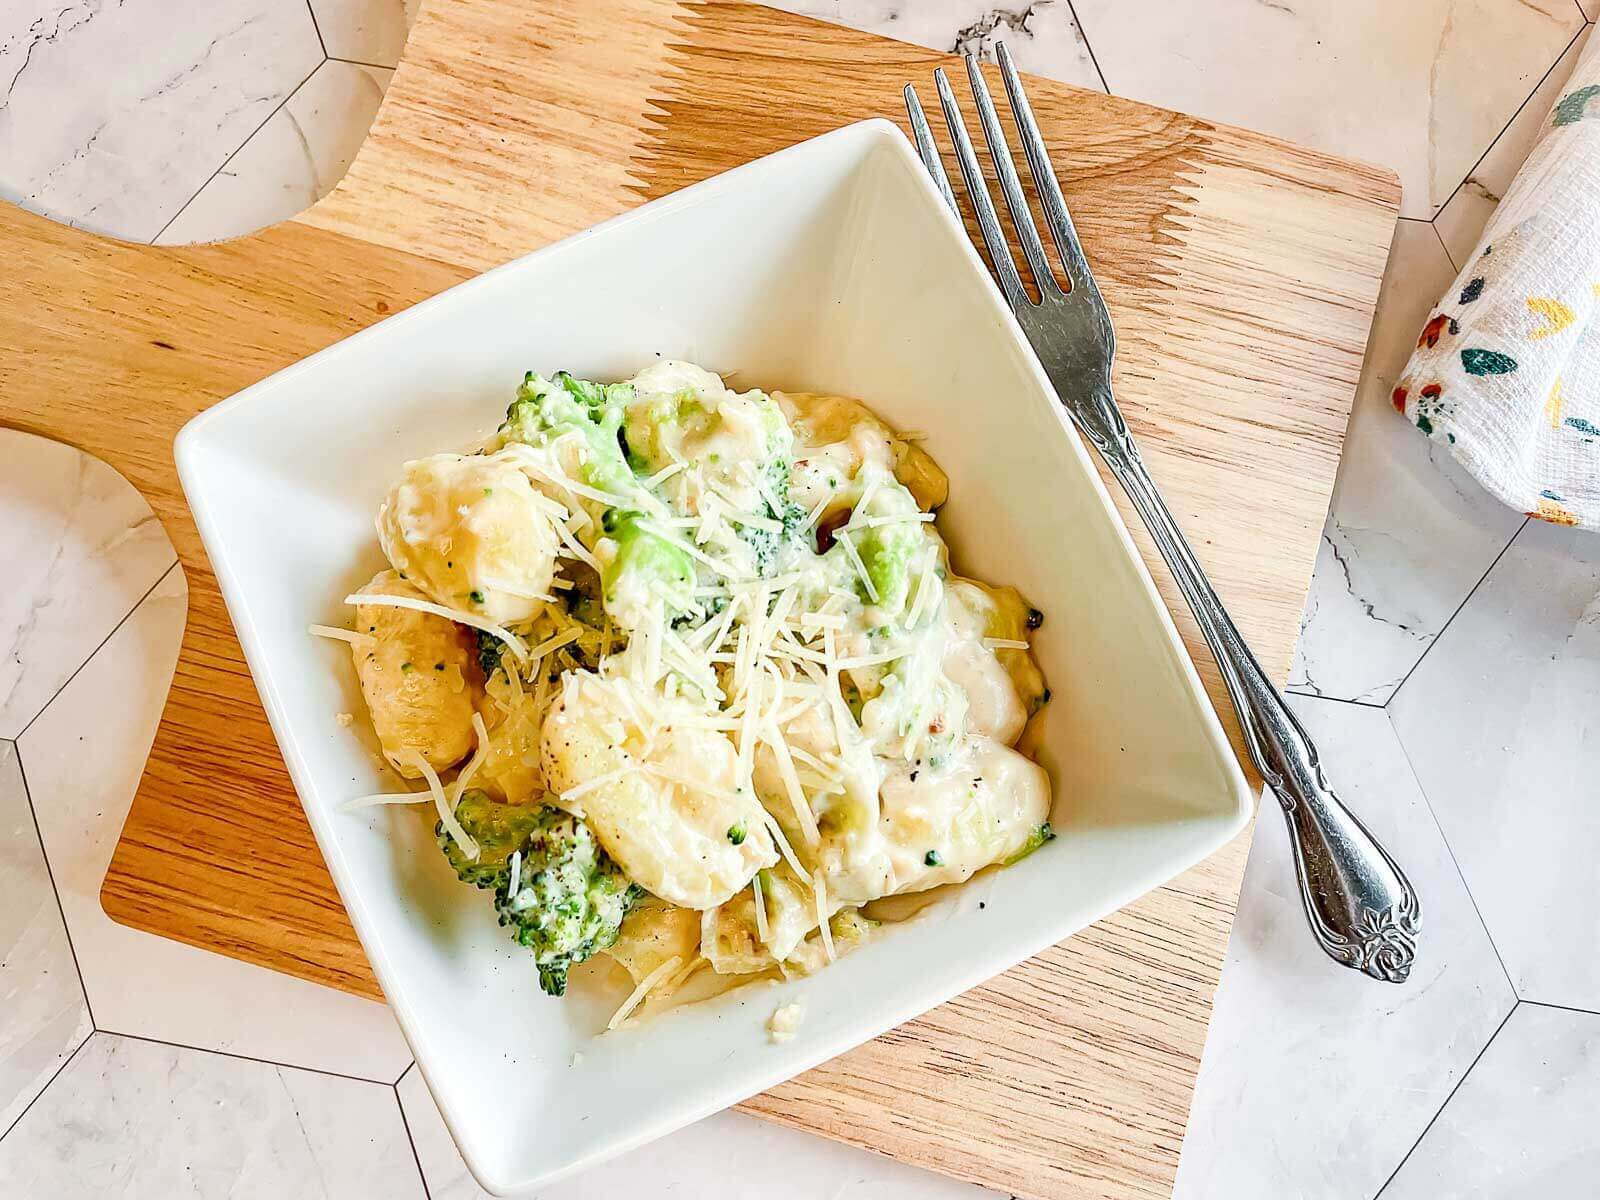 A top shot of the gnocchi alfredo with broccoli.